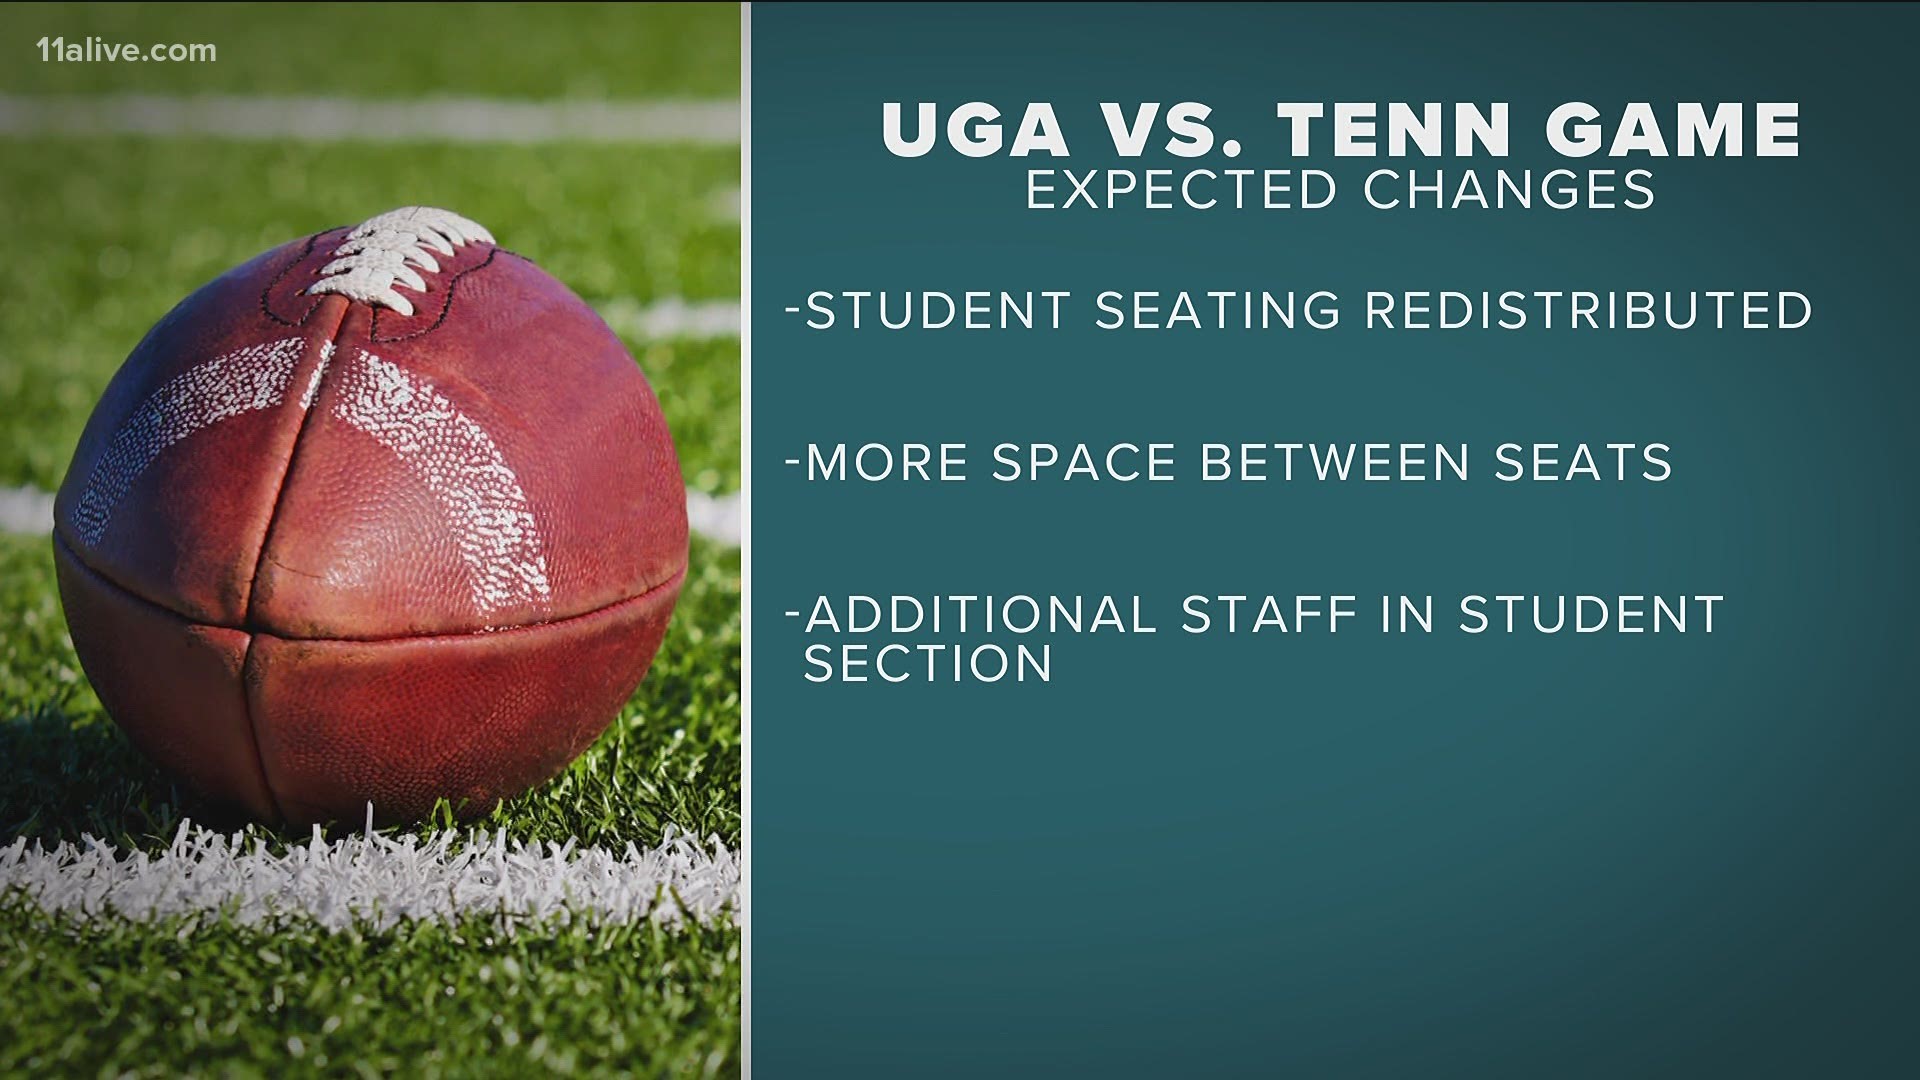 This comes after the University reported more than 20,000 fans attended the UGA vs. Auburn game